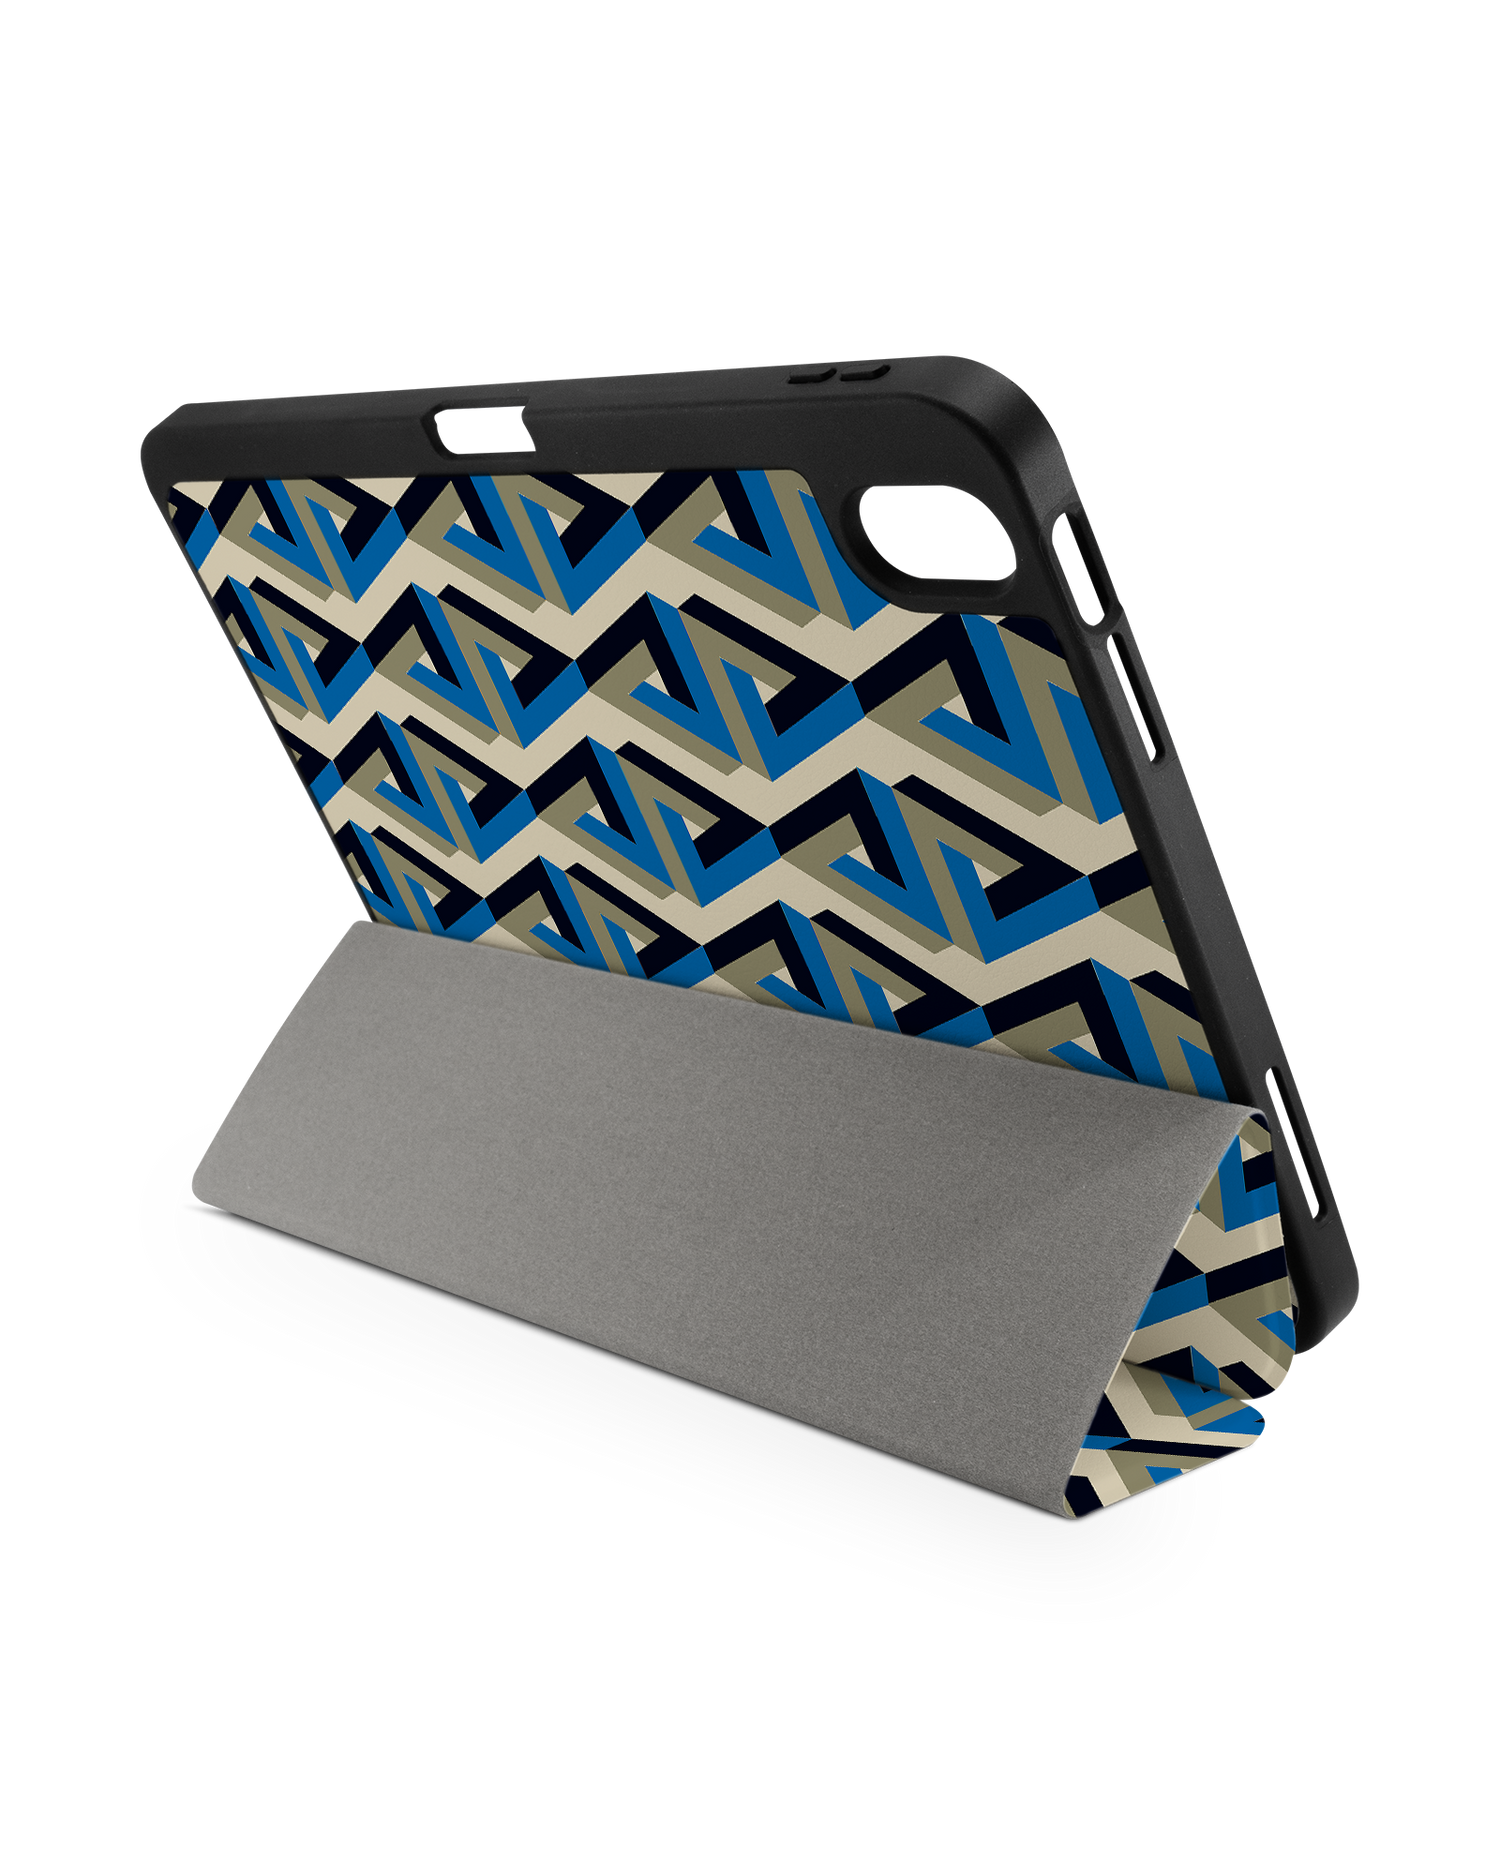 Penrose Pattern iPad Case with Pencil Holder for Apple iPad (10th Generation): Set up in landscape format (back view)